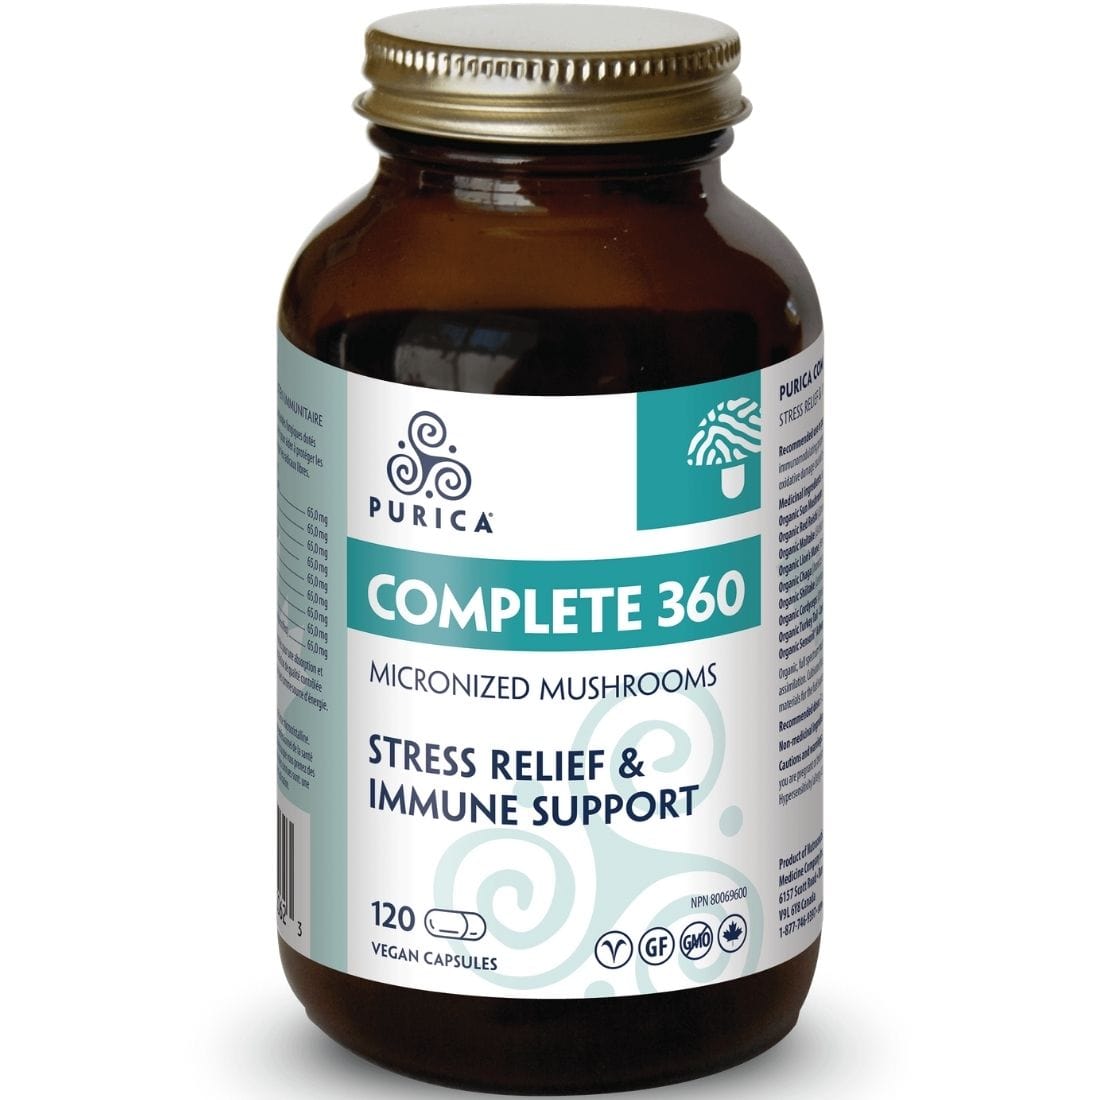 Purica Complete 360 Micronized Mushrooms (360 Degree Stress Relief & Immune Support)